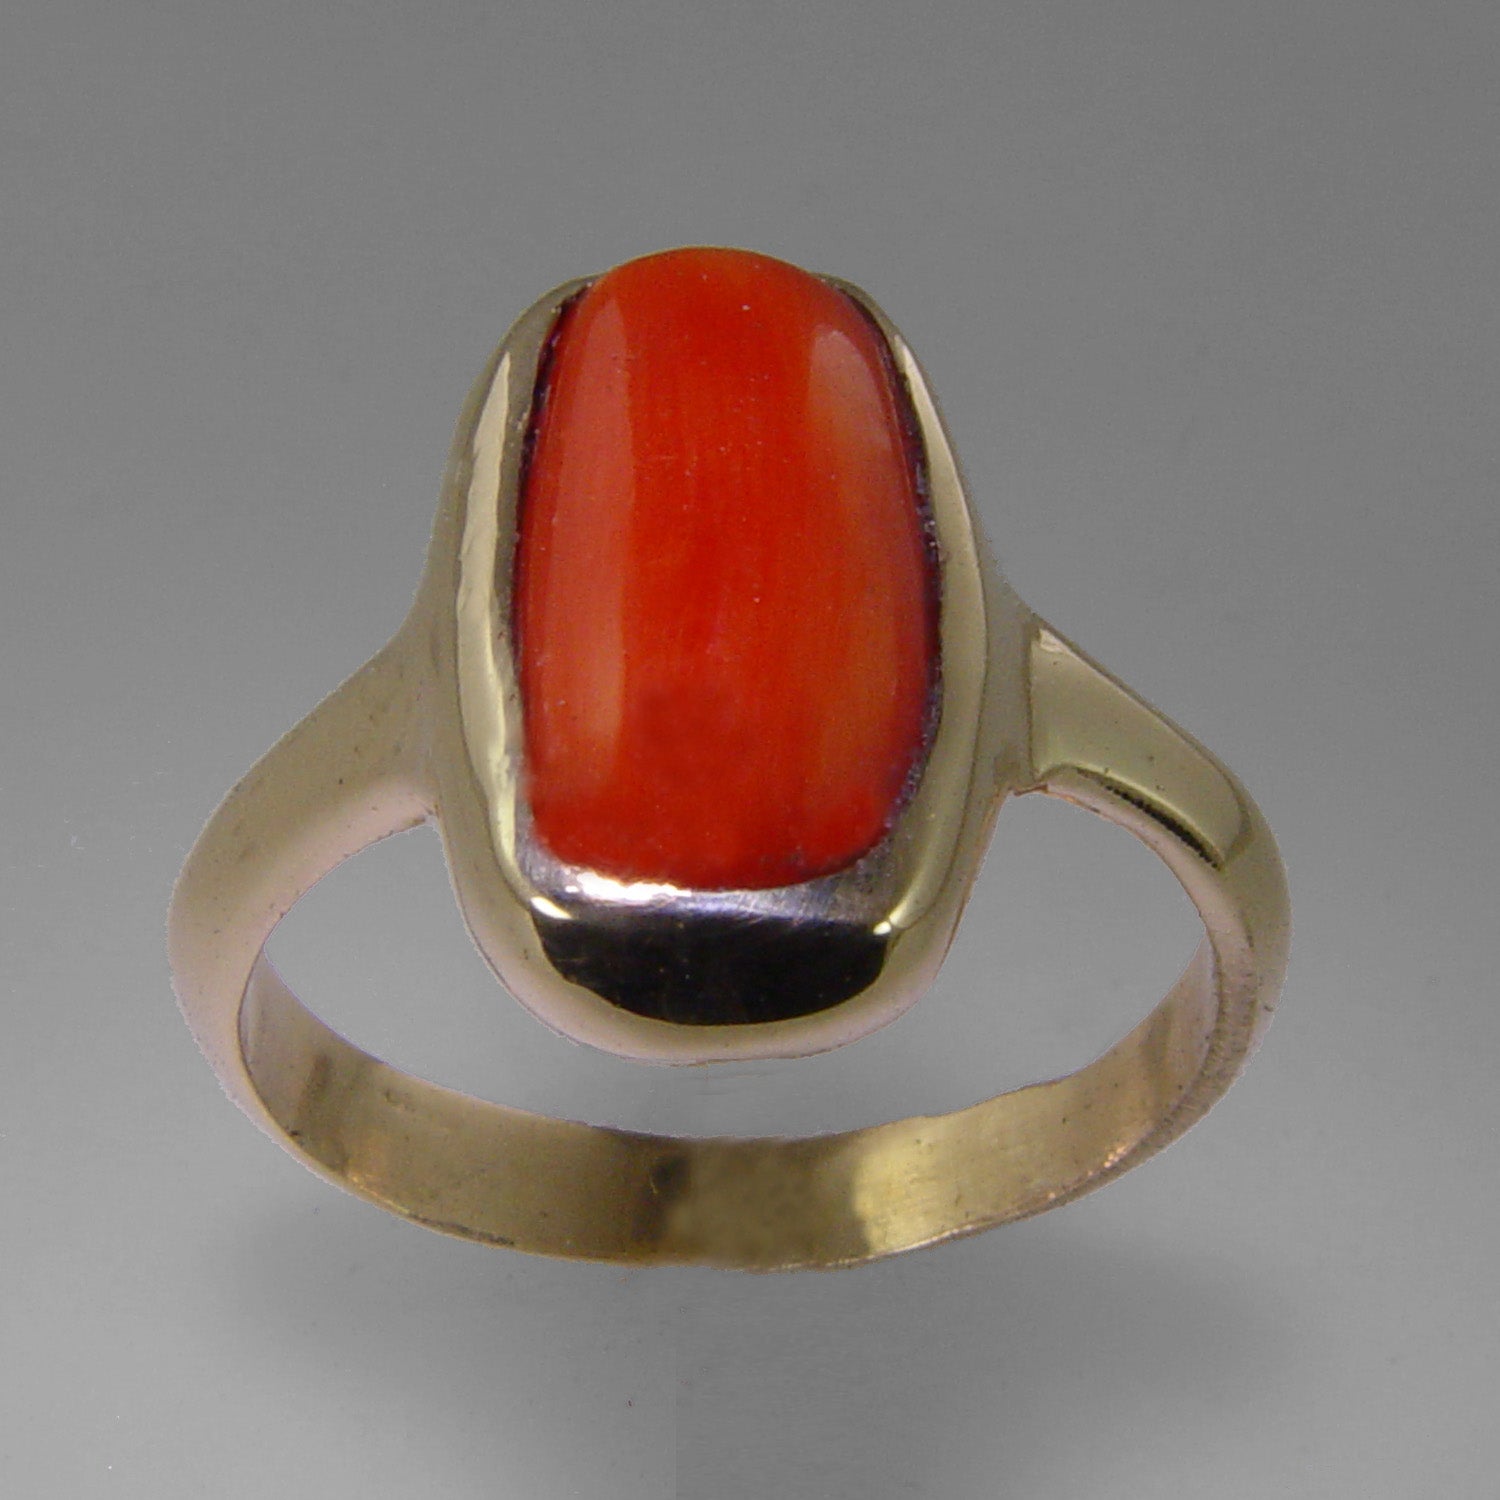 Can I wear a red coral stone on the left-hand ring finger? - Quora